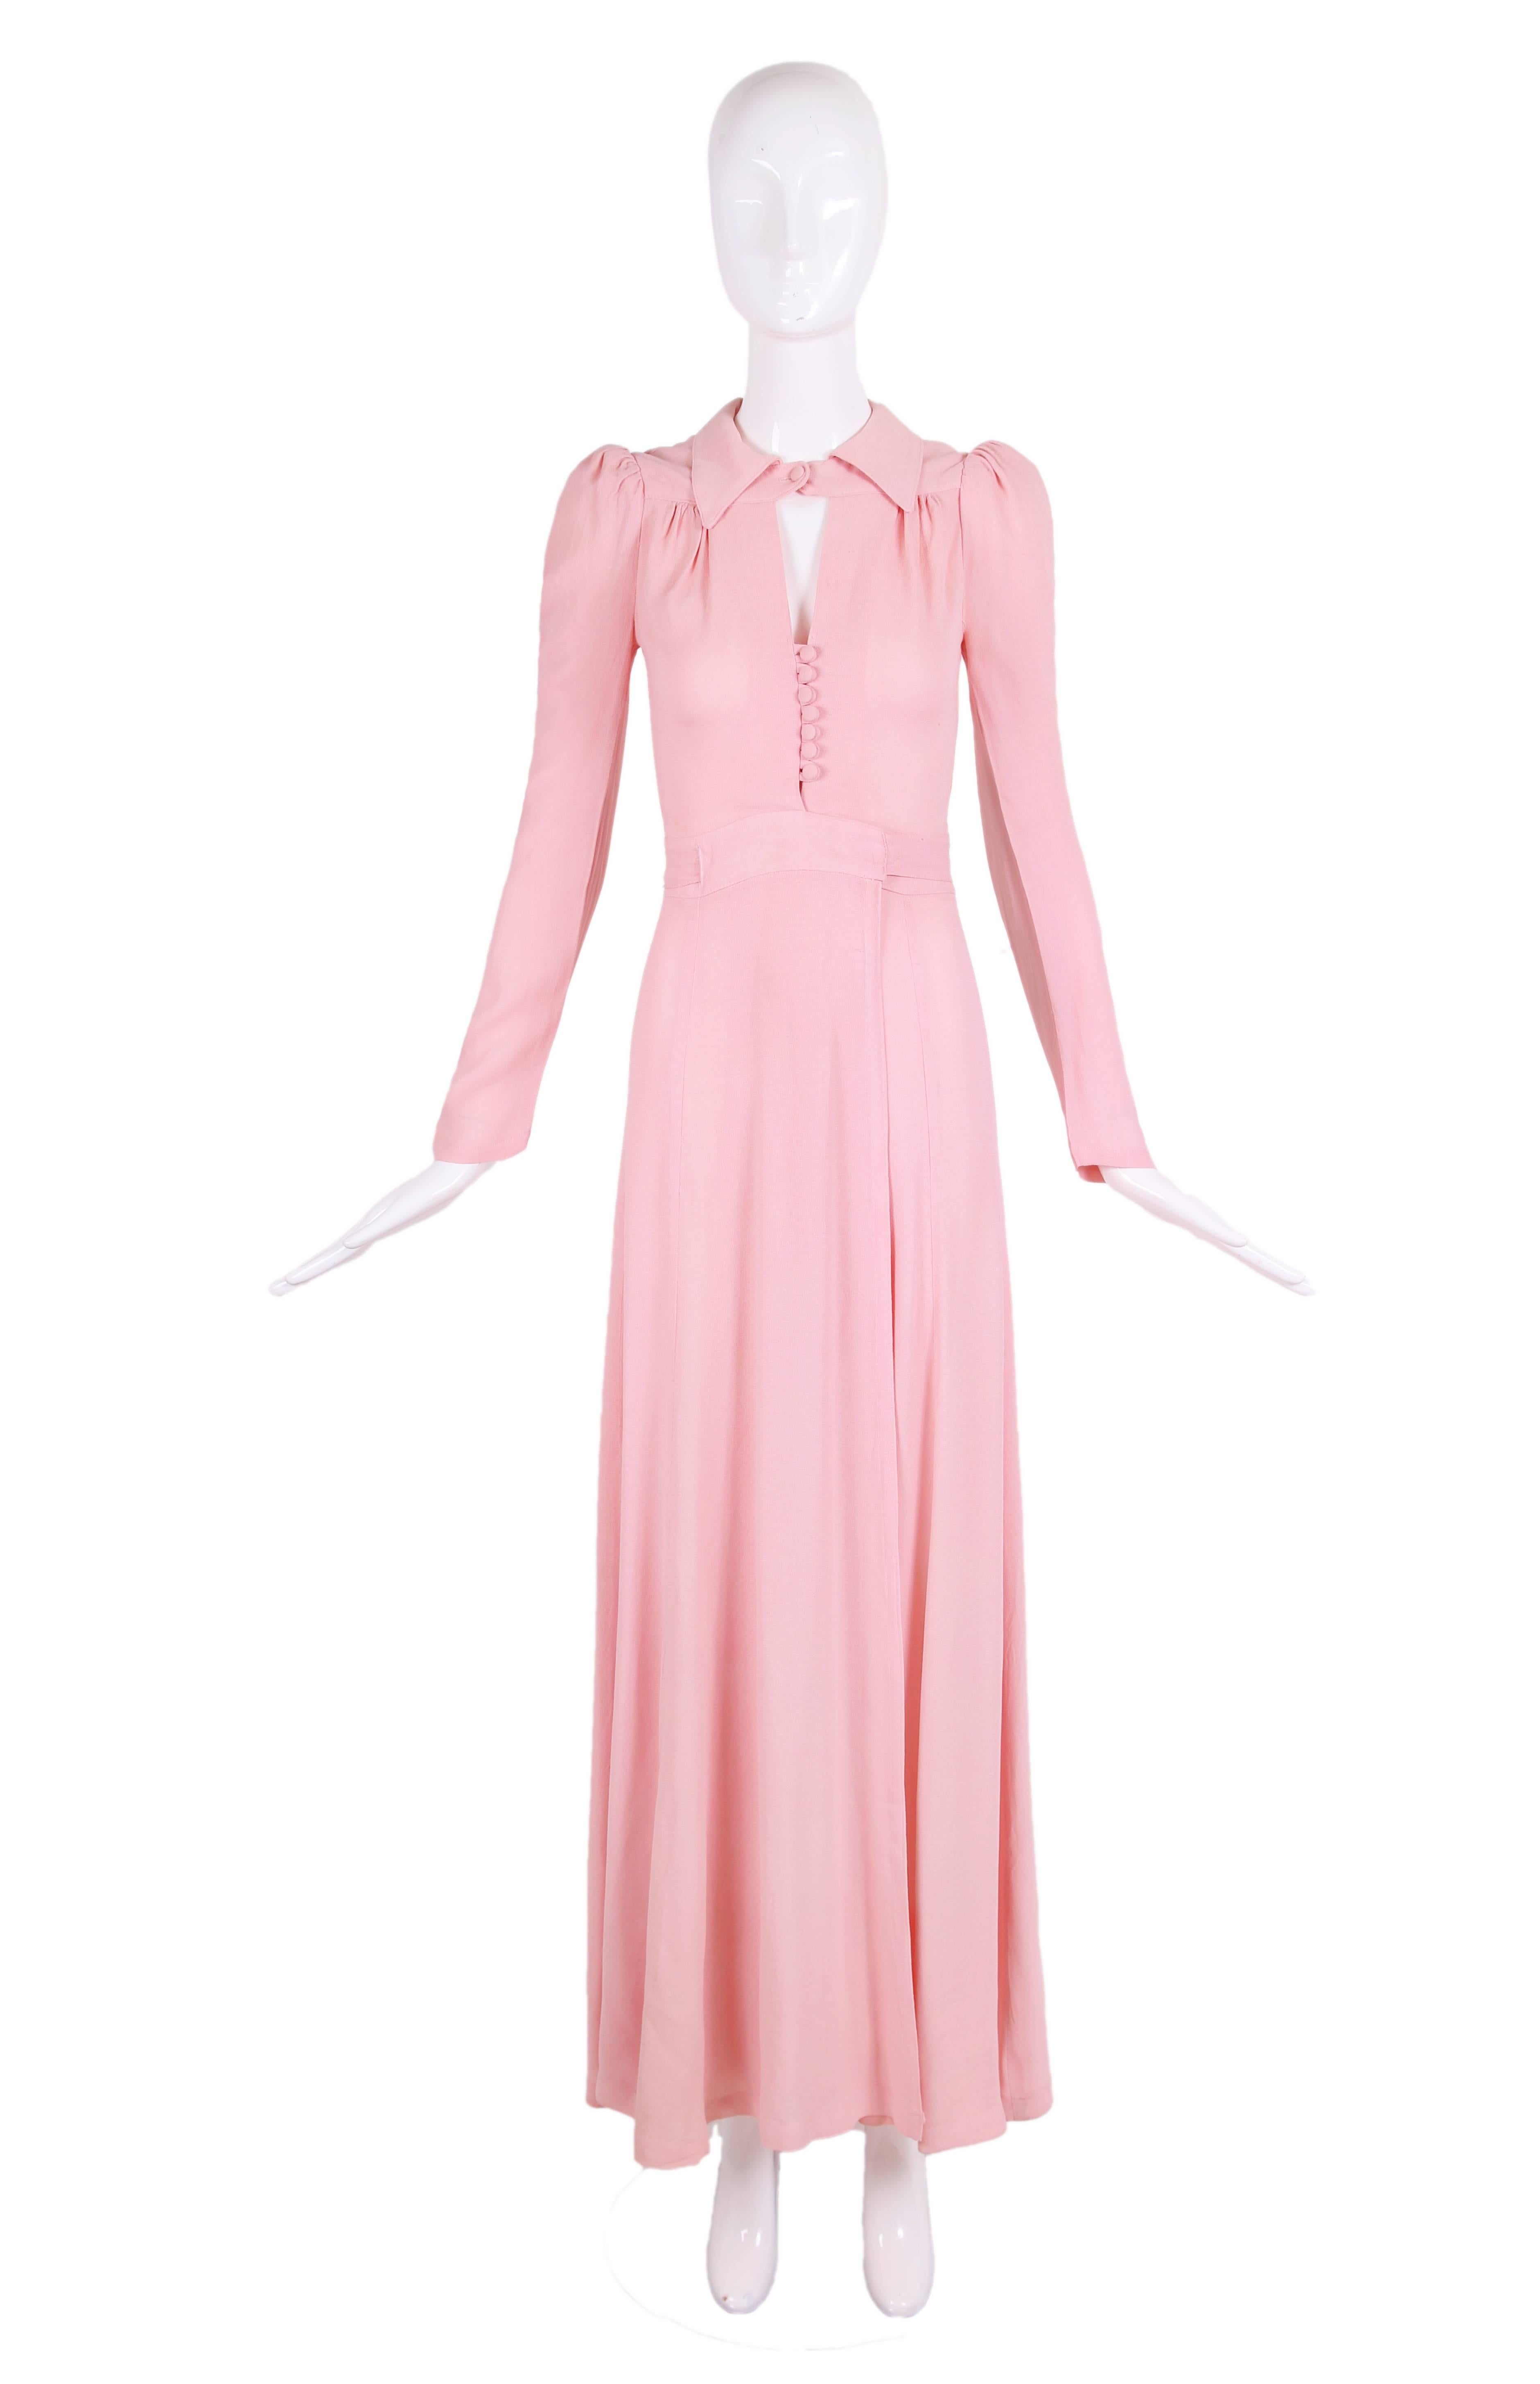 1970's Ossie Clark for Radley pink moss crepe maxi dress featuring a wrap skirt with extra long waist ties, a collared neckline with keyhole opening detail, fabric-covered buttons and a slight puffed sleeve. In very good condition with some